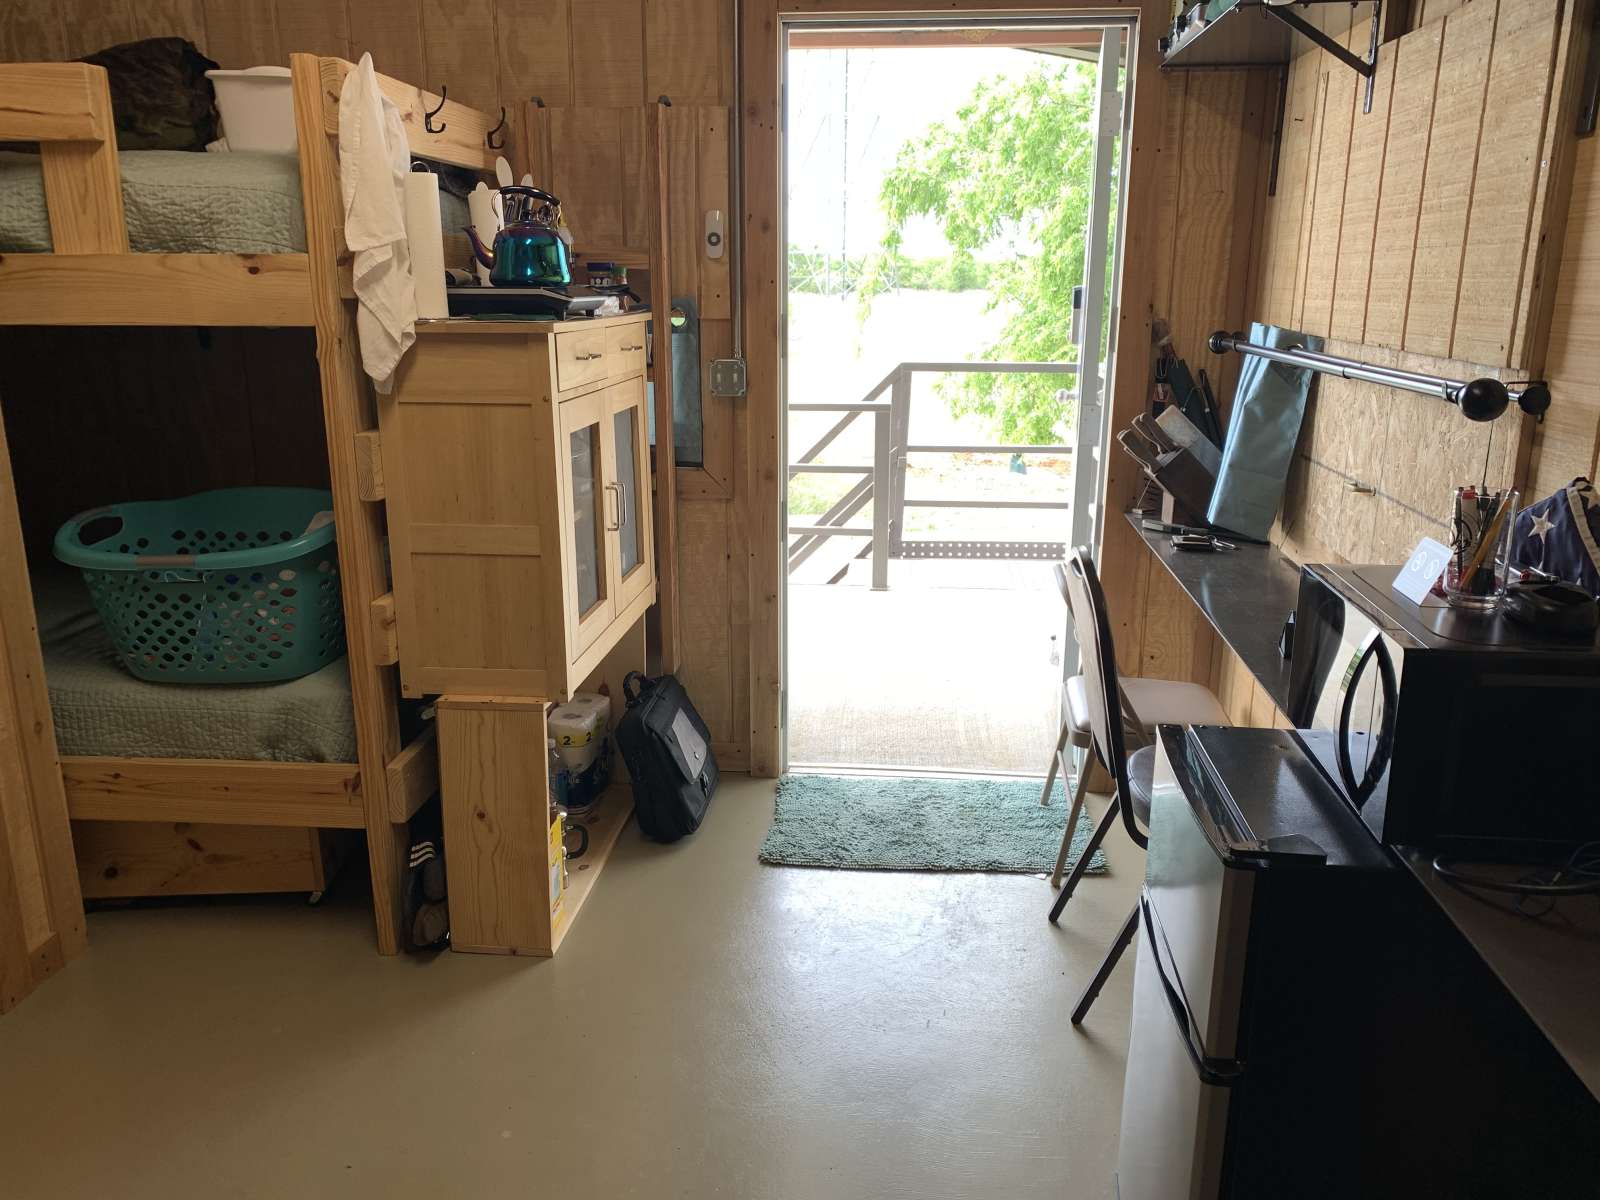 A room with two bunk beds and a desk.